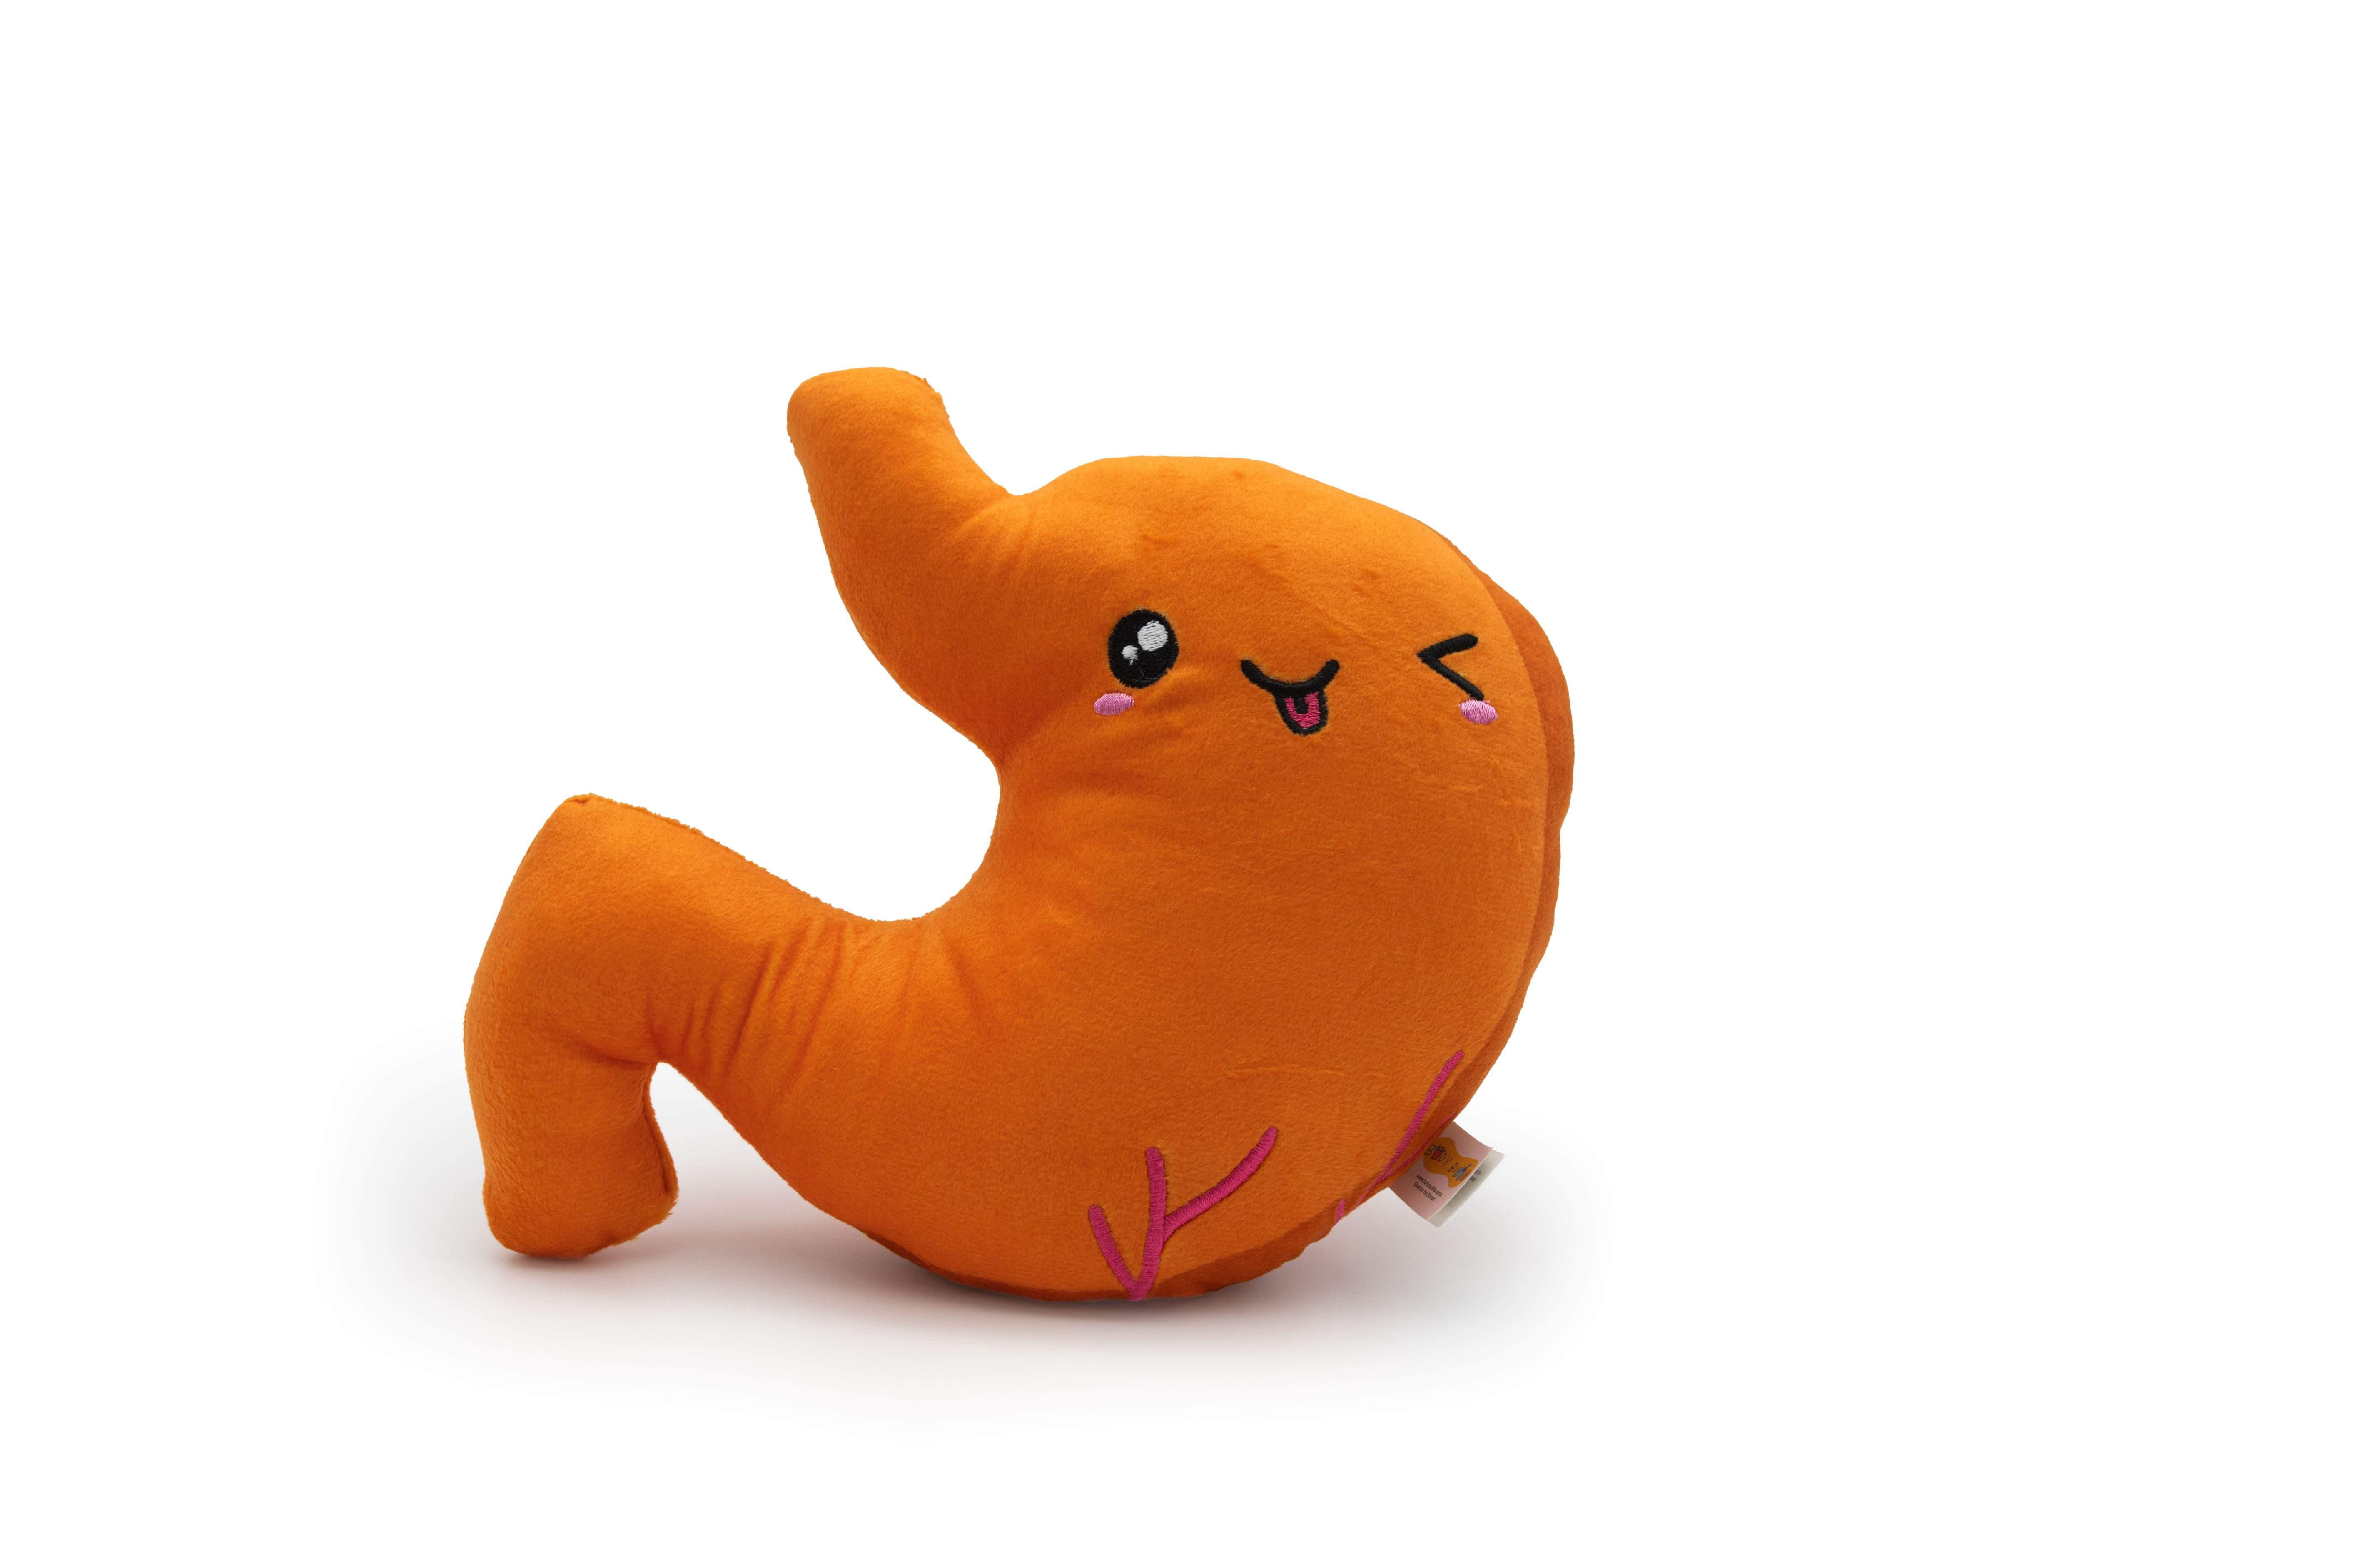 Gastron the Stomach Plushie